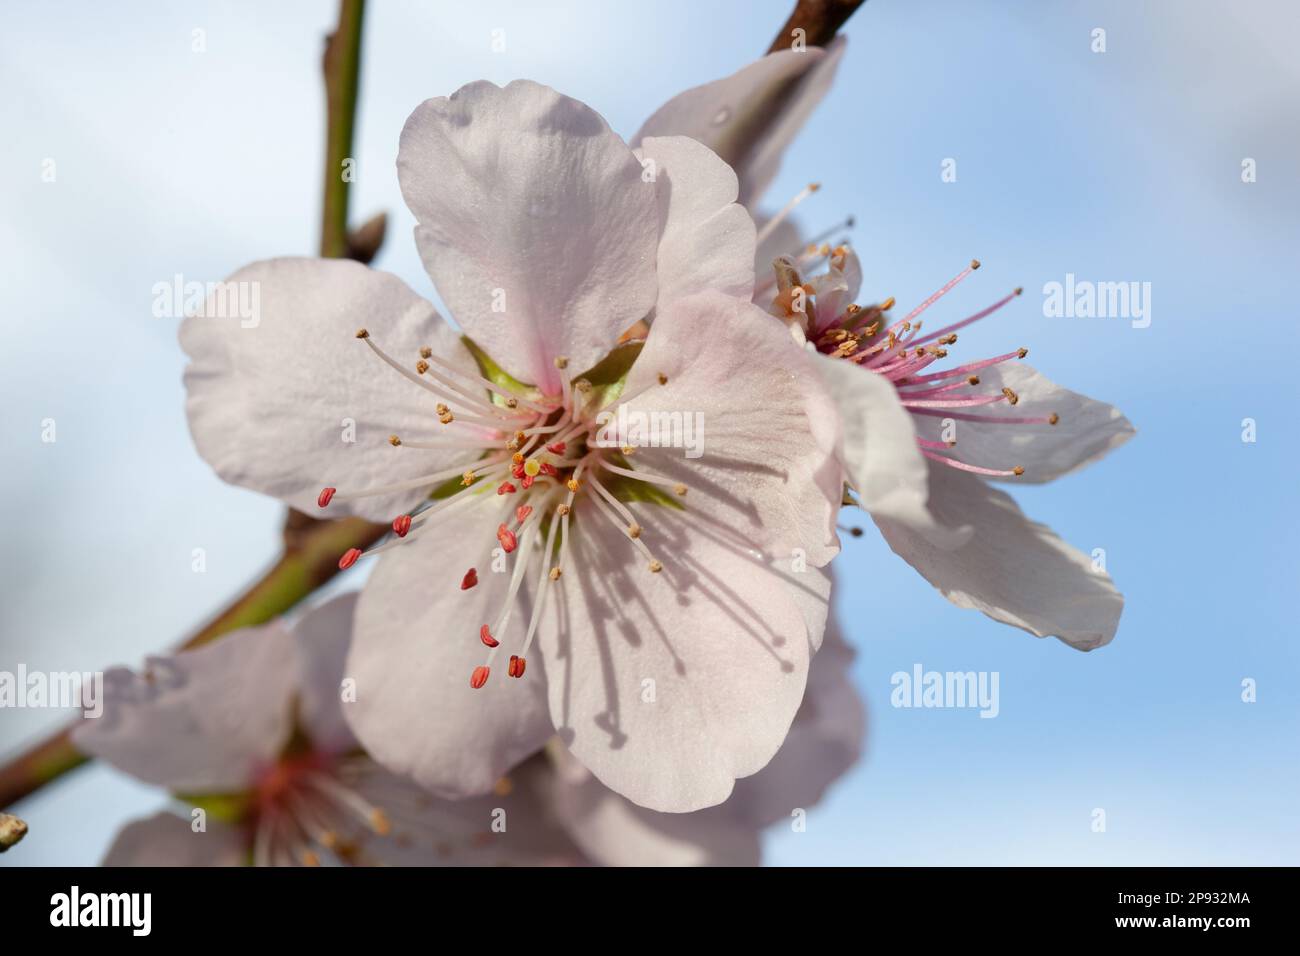 UK weather, London, 10 March 2023: Fifteen minutes after a hail storm, sun shines on almond blossom in a garden in Clapha, south London. Anna Watson/Alamy Live News Stock Photo